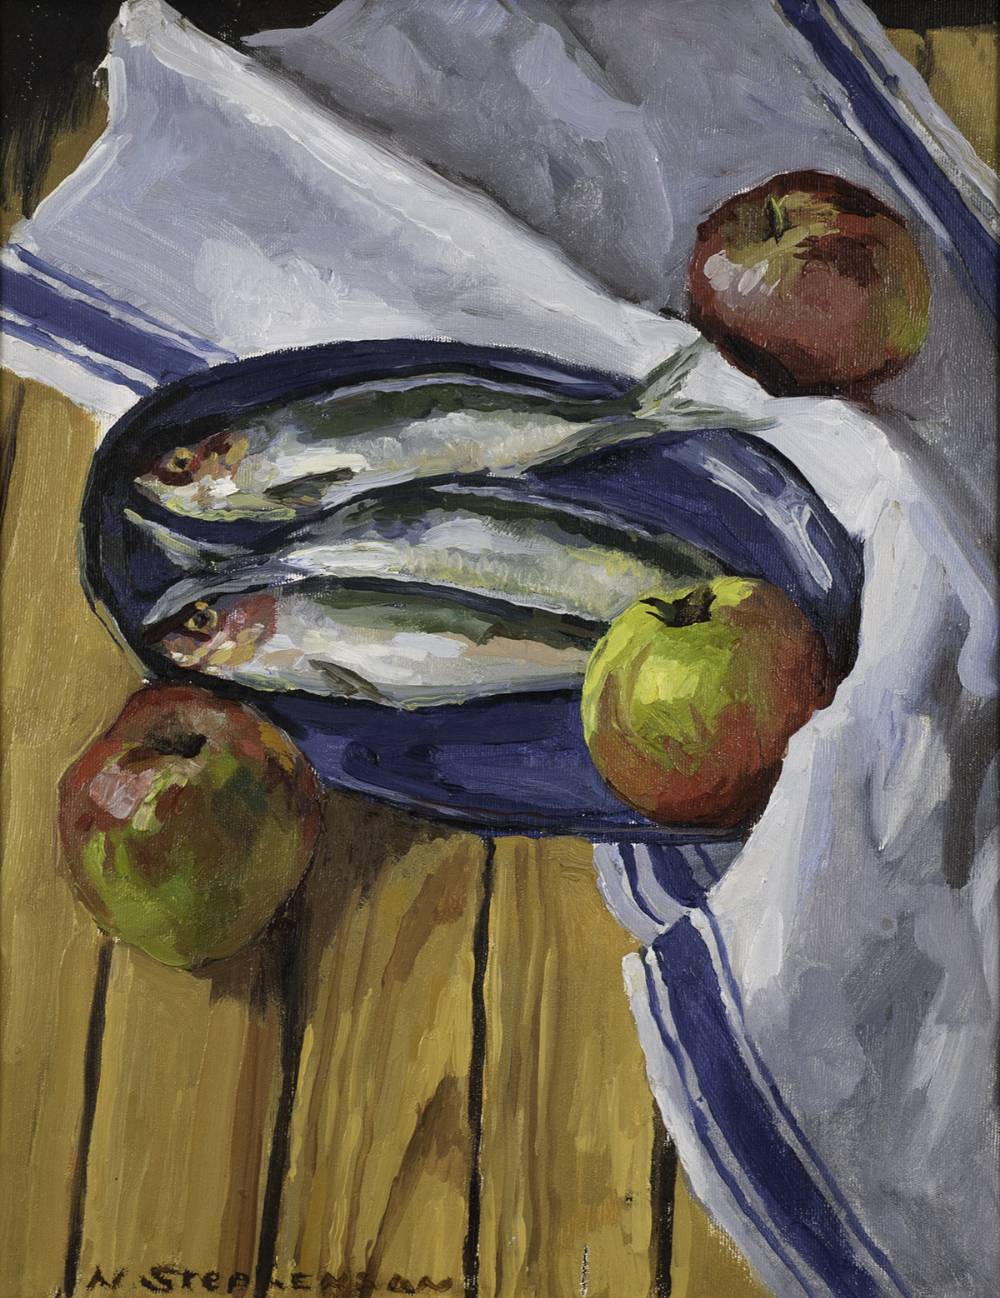 FRUIT OF THE SEA by Nuala Stephenson sold for �260 at Whyte's Auctions